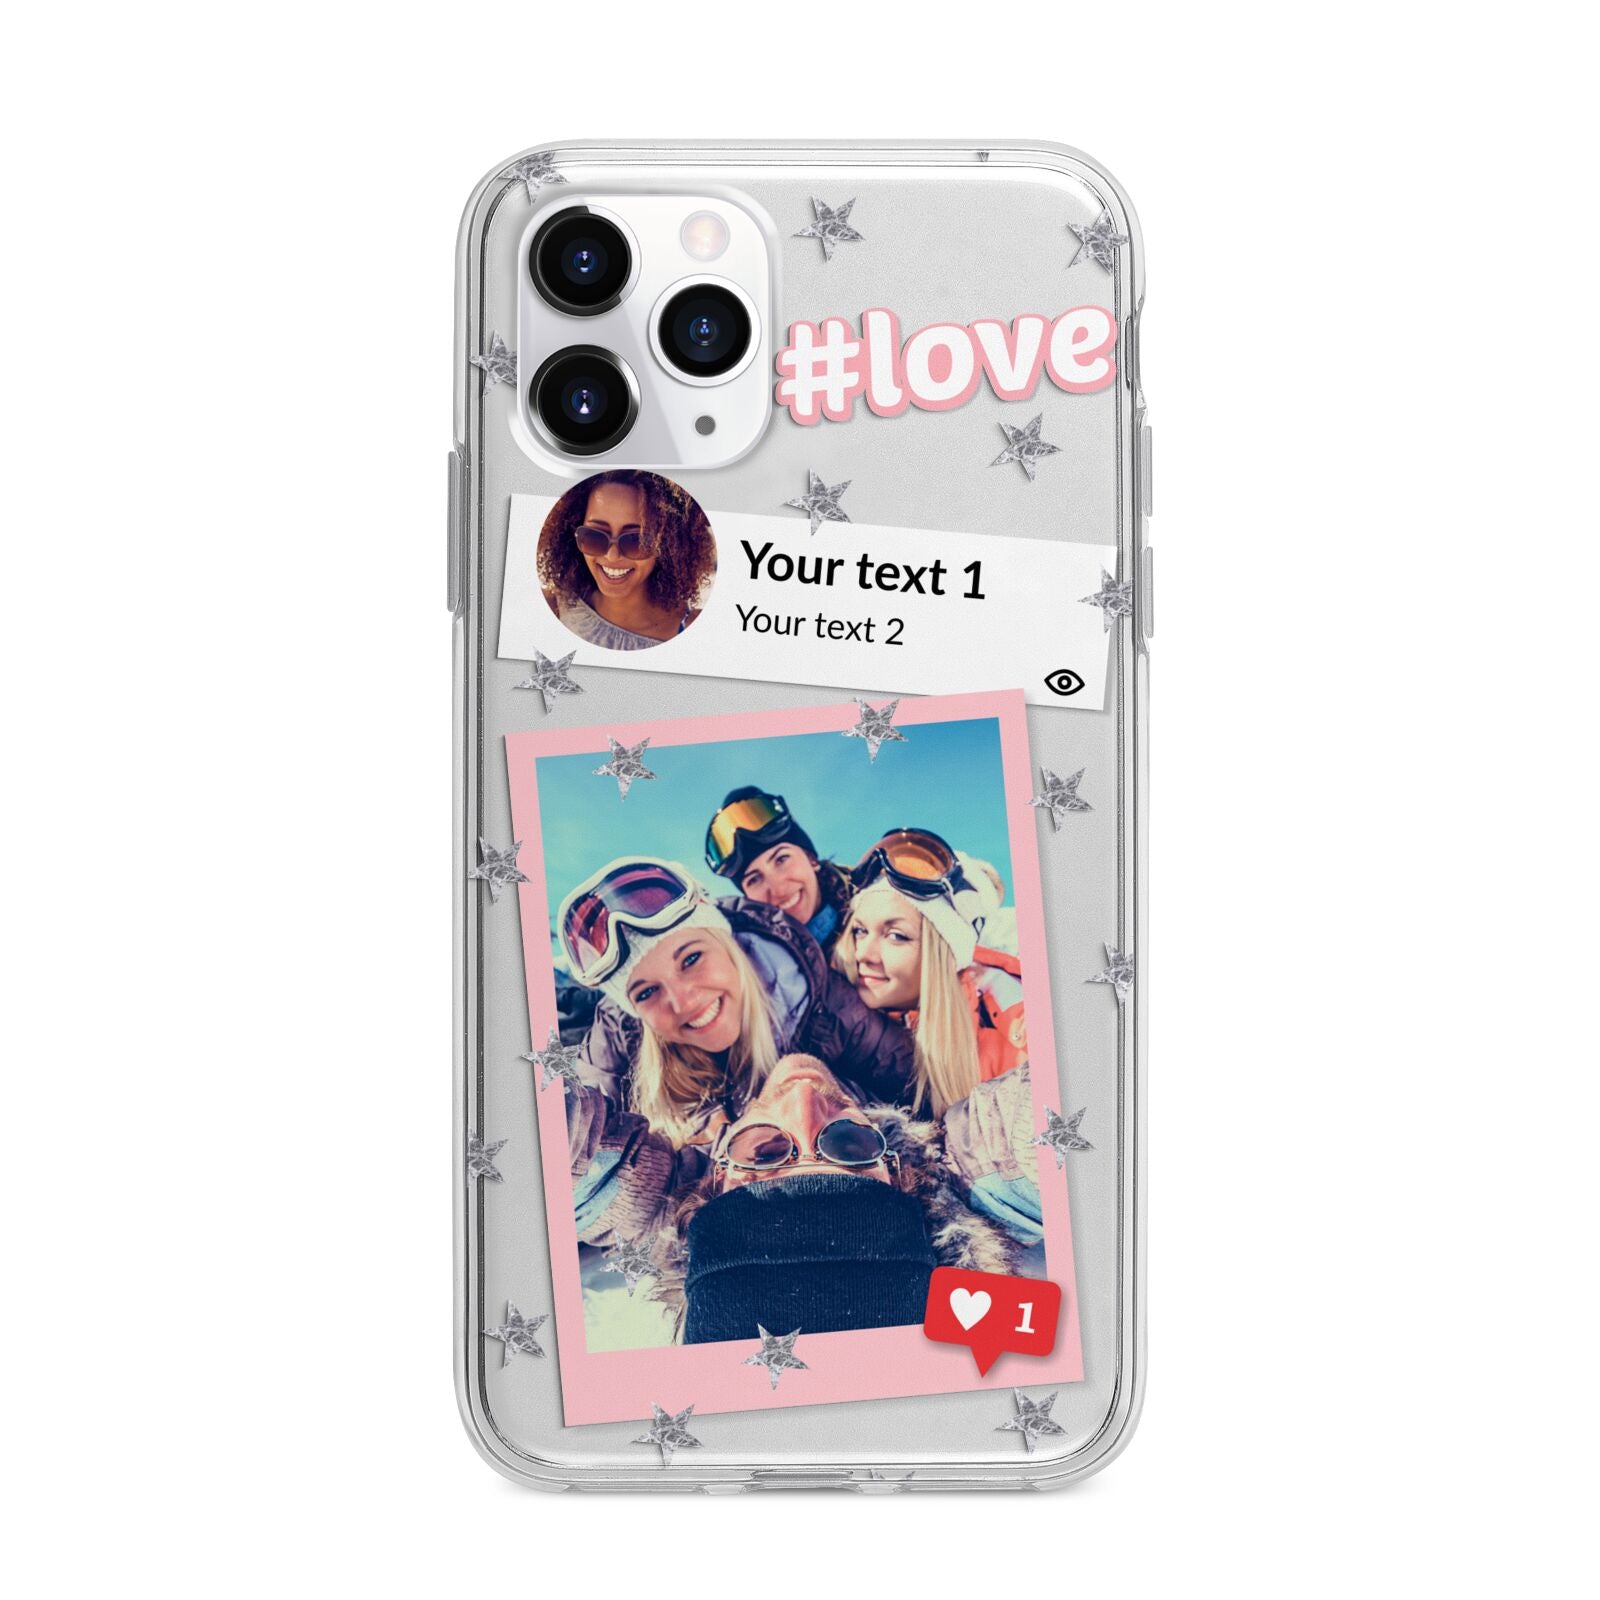 Starry Social Media Photo Montage Upload with Text Apple iPhone 11 Pro Max in Silver with Bumper Case